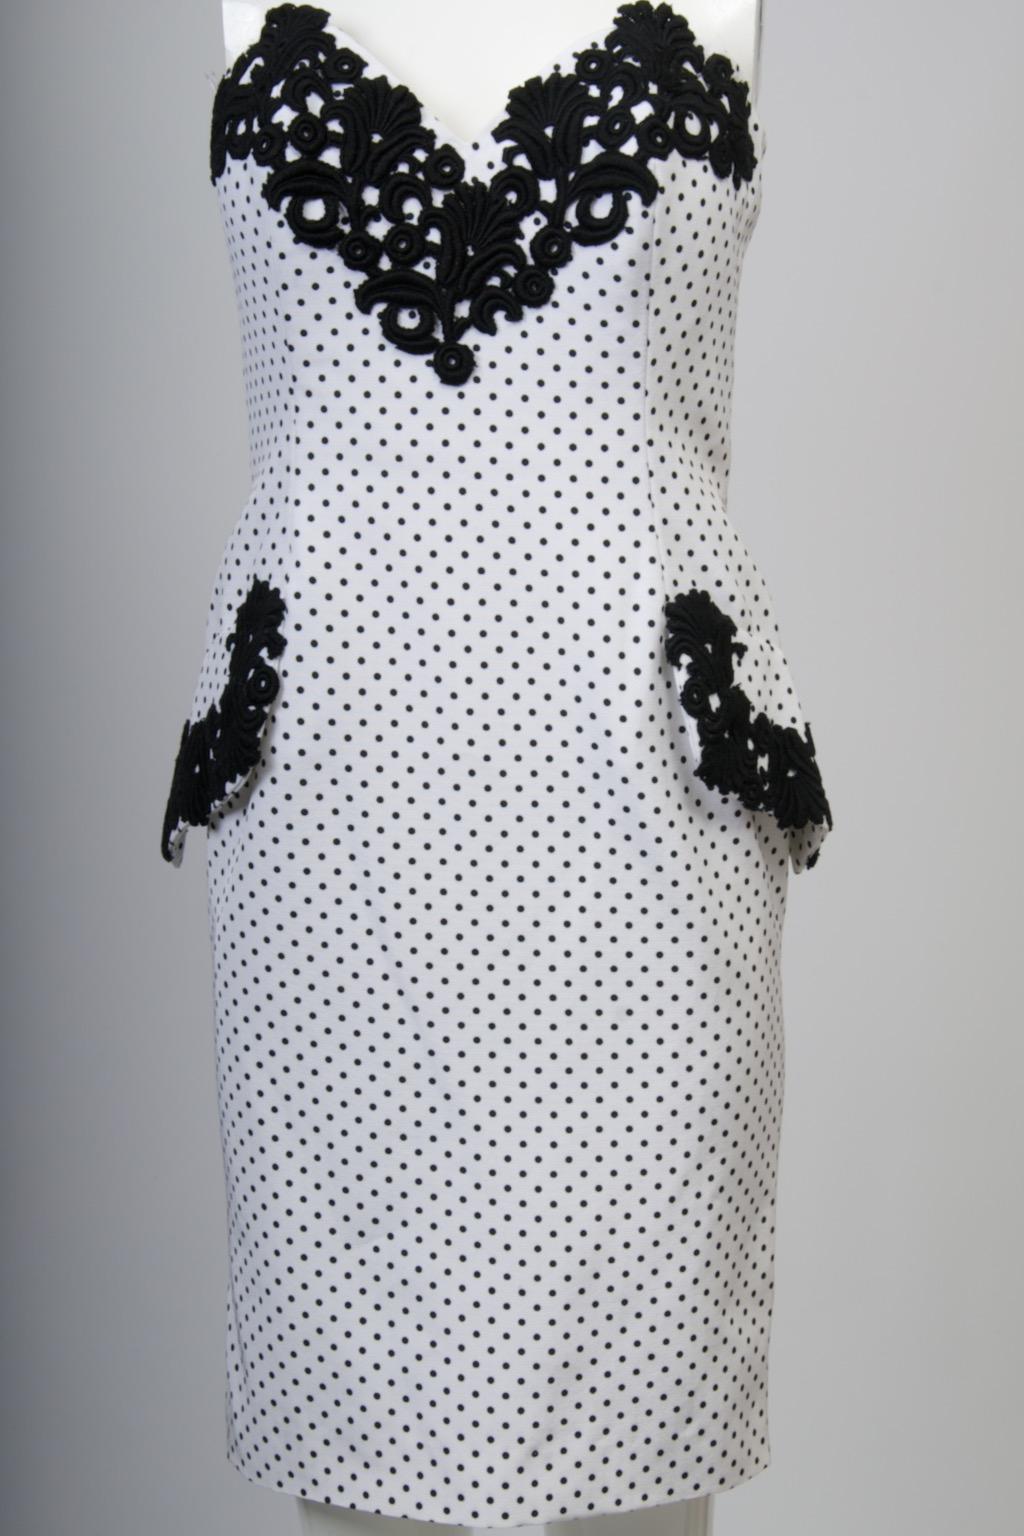 Isabelle Allard 1980s strapless dress and bolero jacket in white faille with tiny black polka dots. The shaped and fitted dress is trimmed at the bustline and faux flap pockets with heavy black lace that punctuates the design. In back, with its